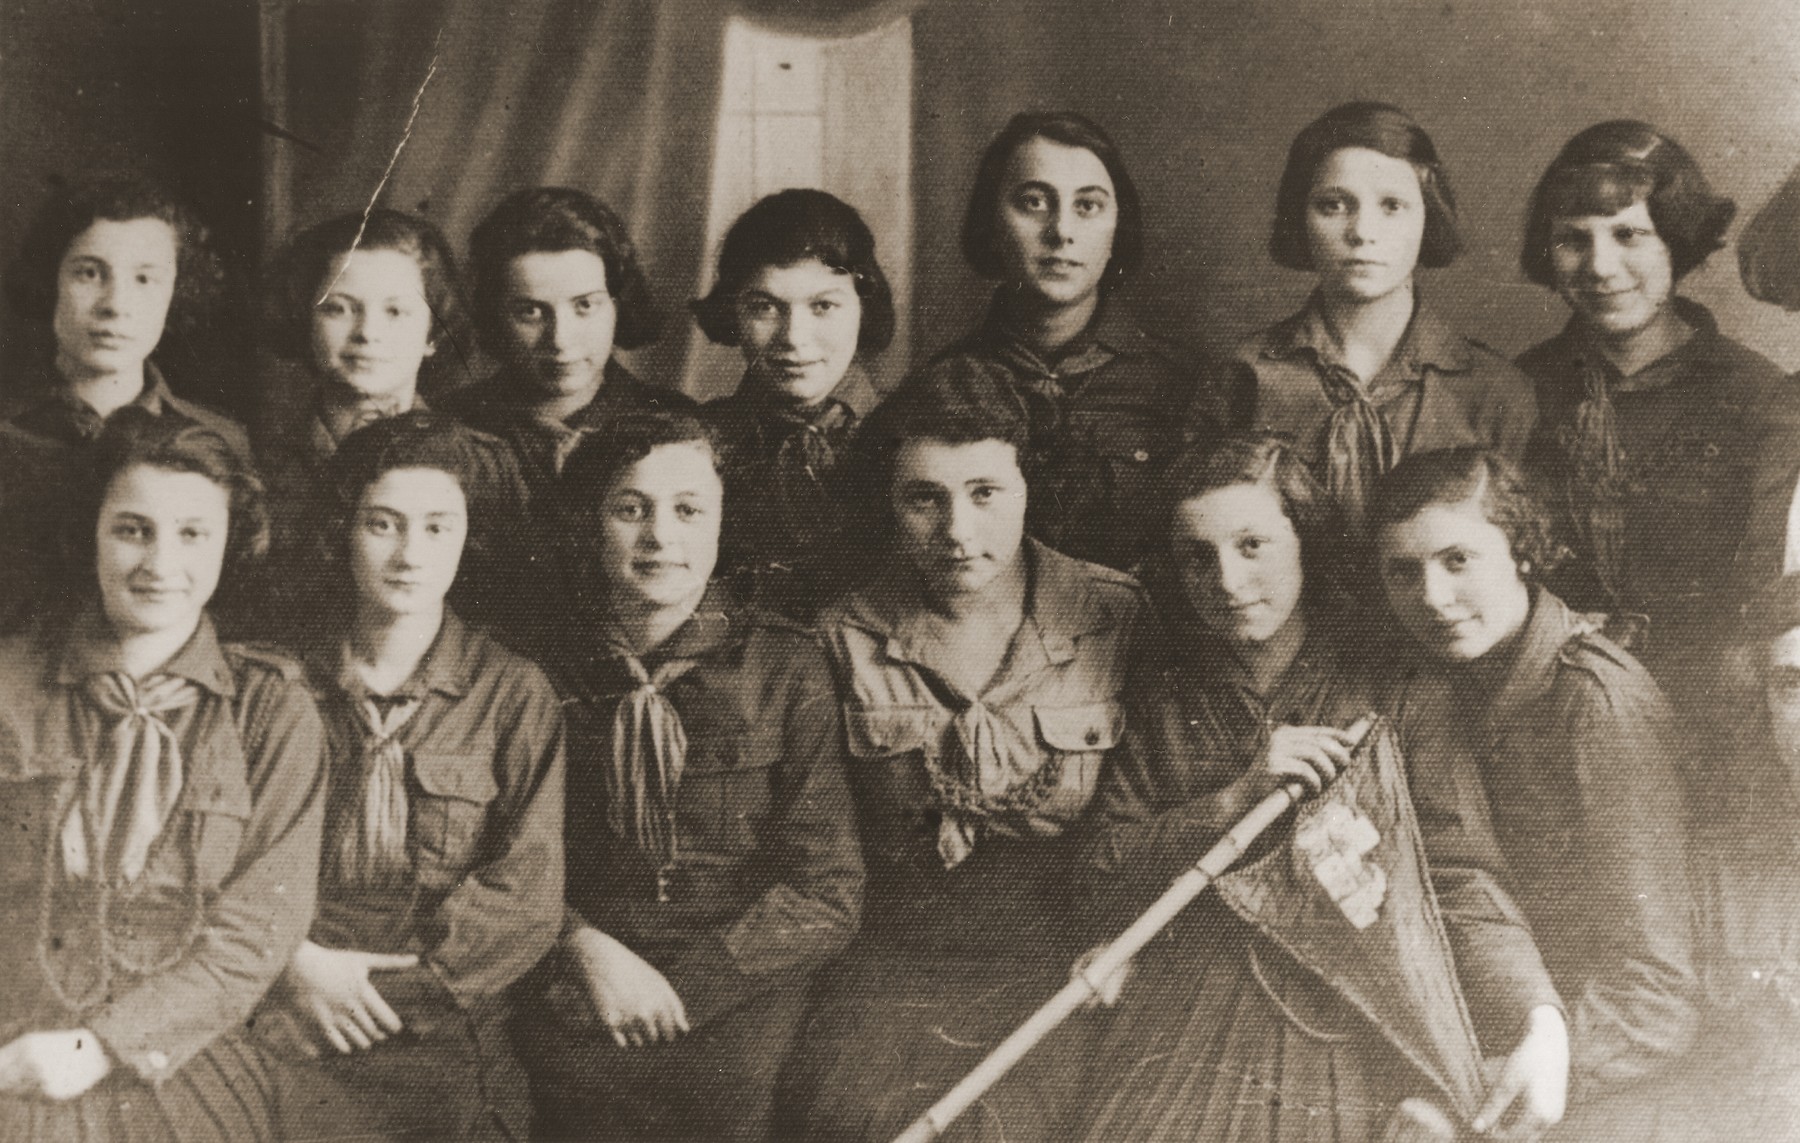 Group portrait of Jewish girls who are members of the "Kwuza Yehudit," a unit of the Hanoar Hatzioni Zionist youth movement in Lodz.

Zofia Zajd is pictured in the second row, third from the right.  Only five of the girls pictured survived the war.